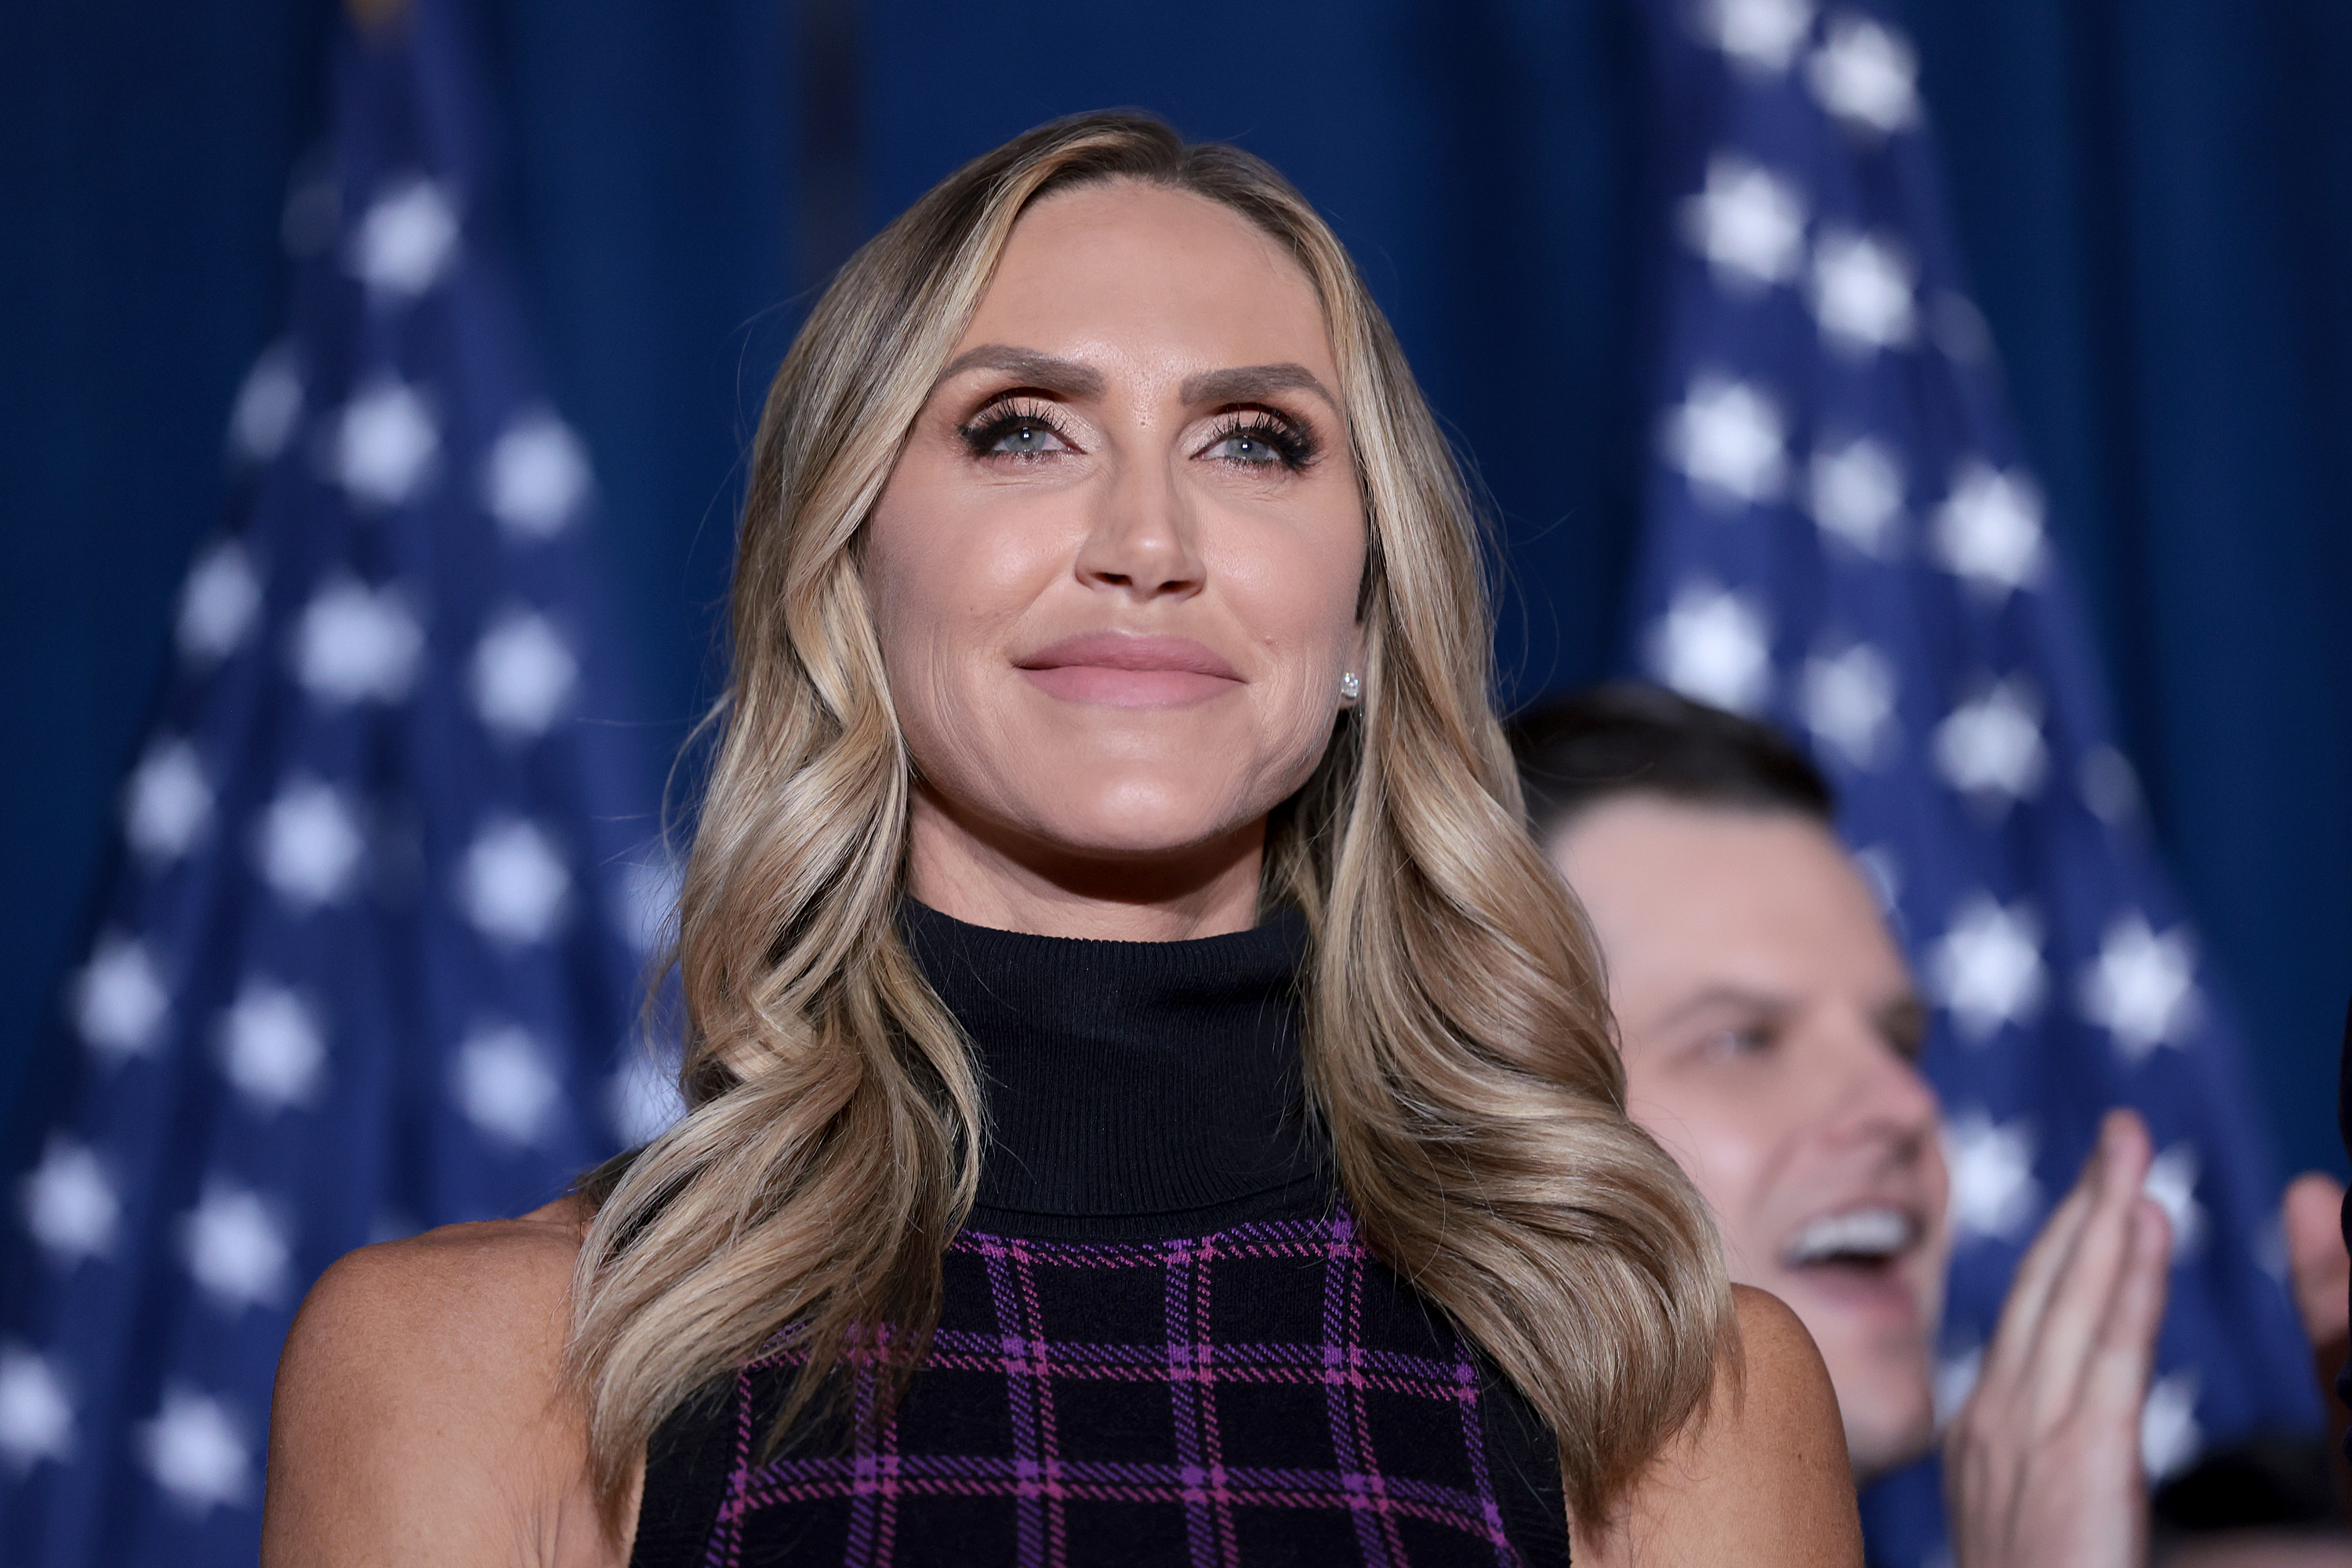 Lara Trump Reveals Some Great News for Voter Integrity